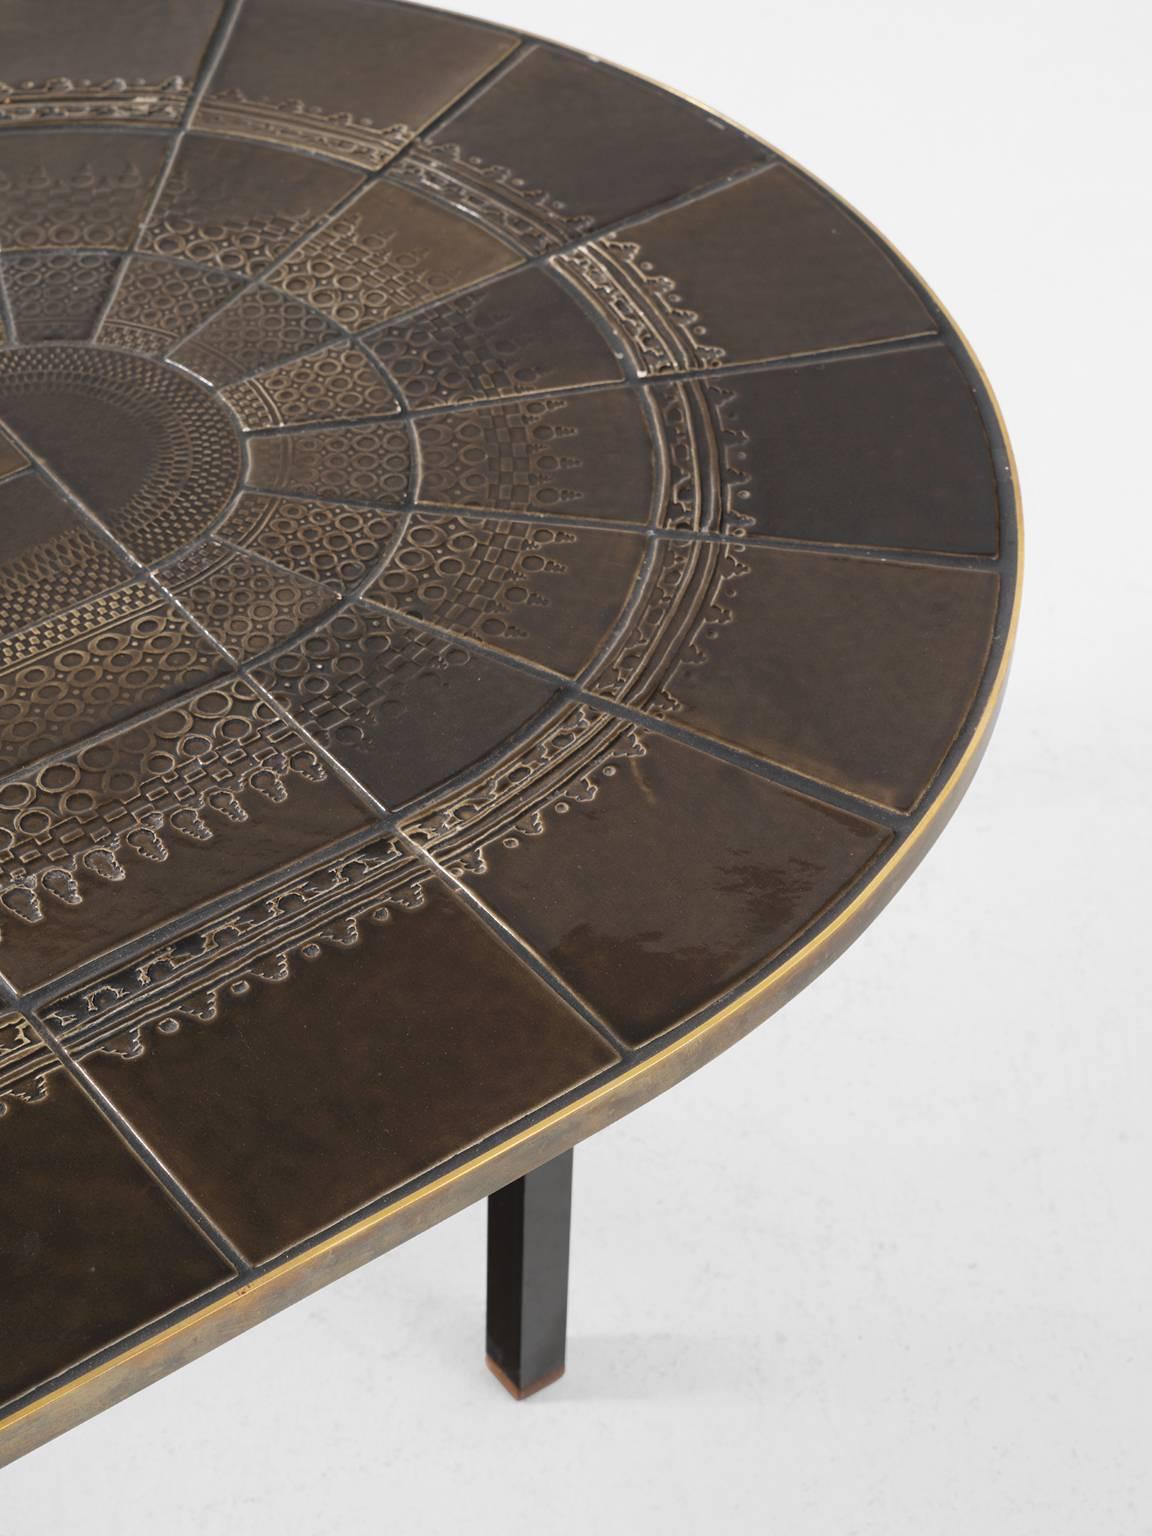 Mid-20th Century Scandinavian Oval Cocktail Table with Ceramic Tiles and Brass